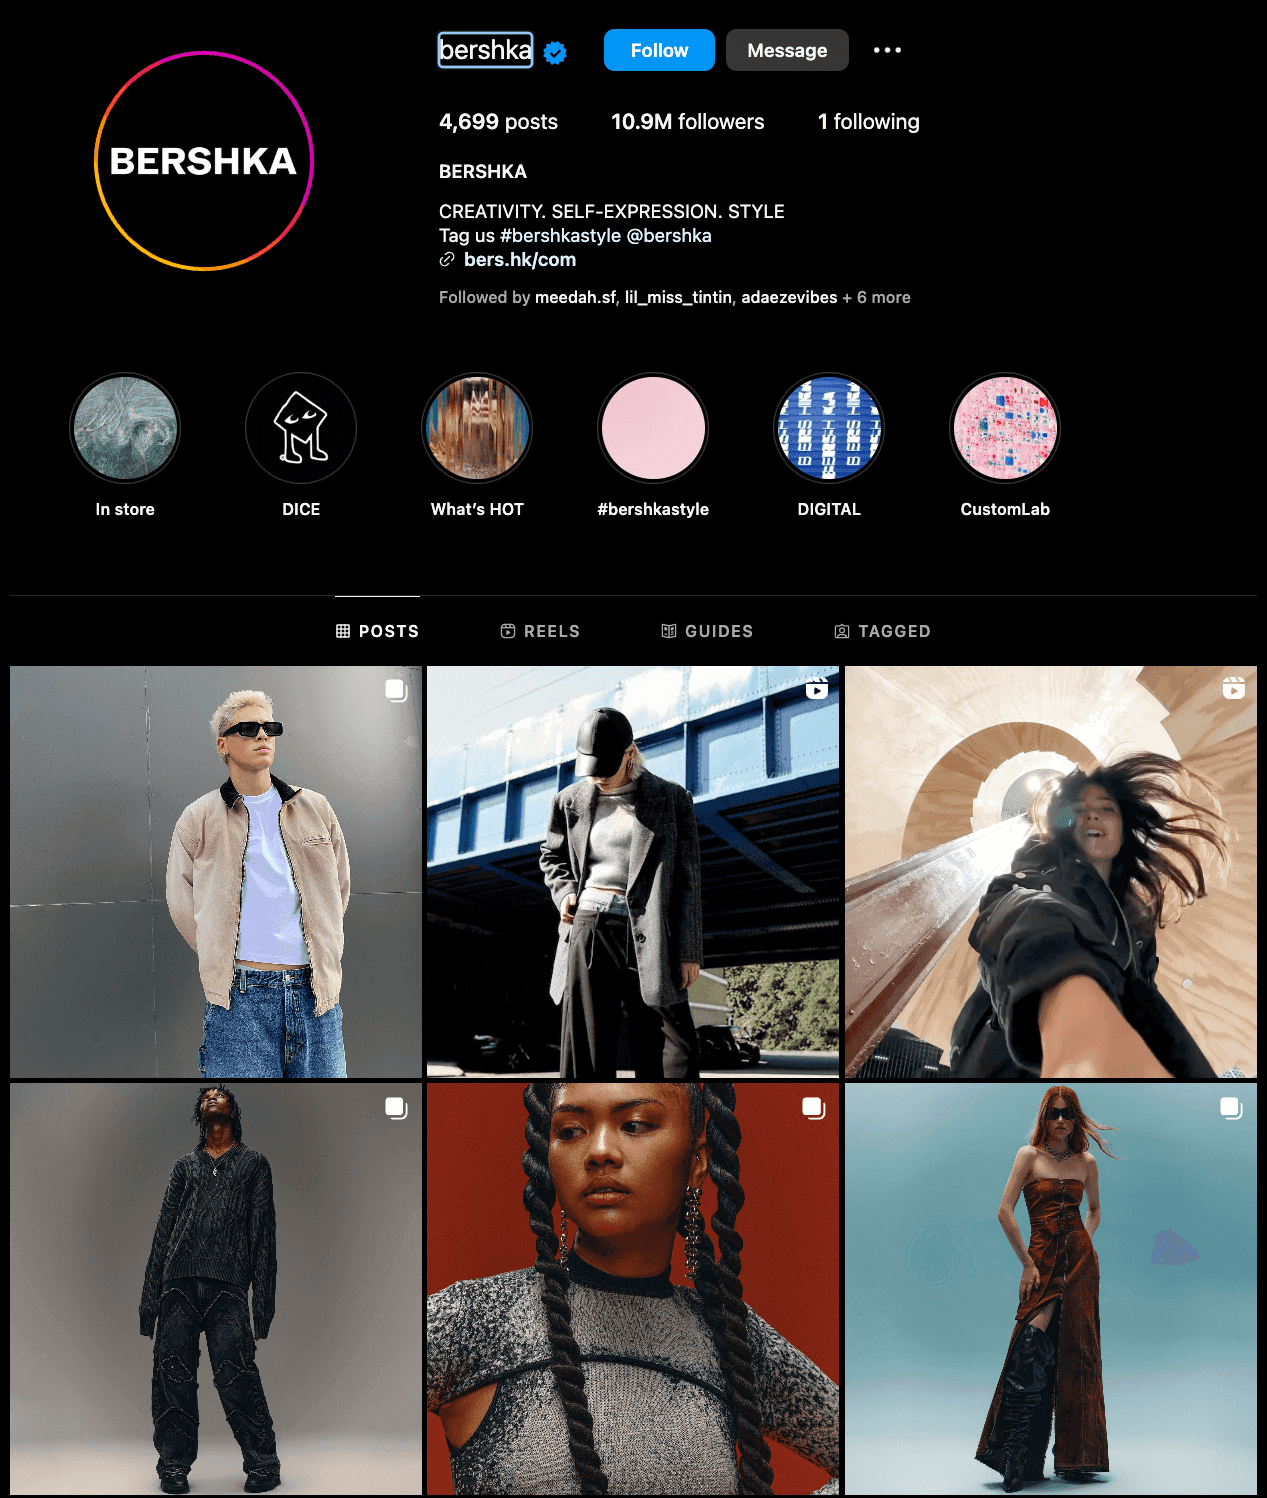 Bershka Instagram account with videos and pictures posted